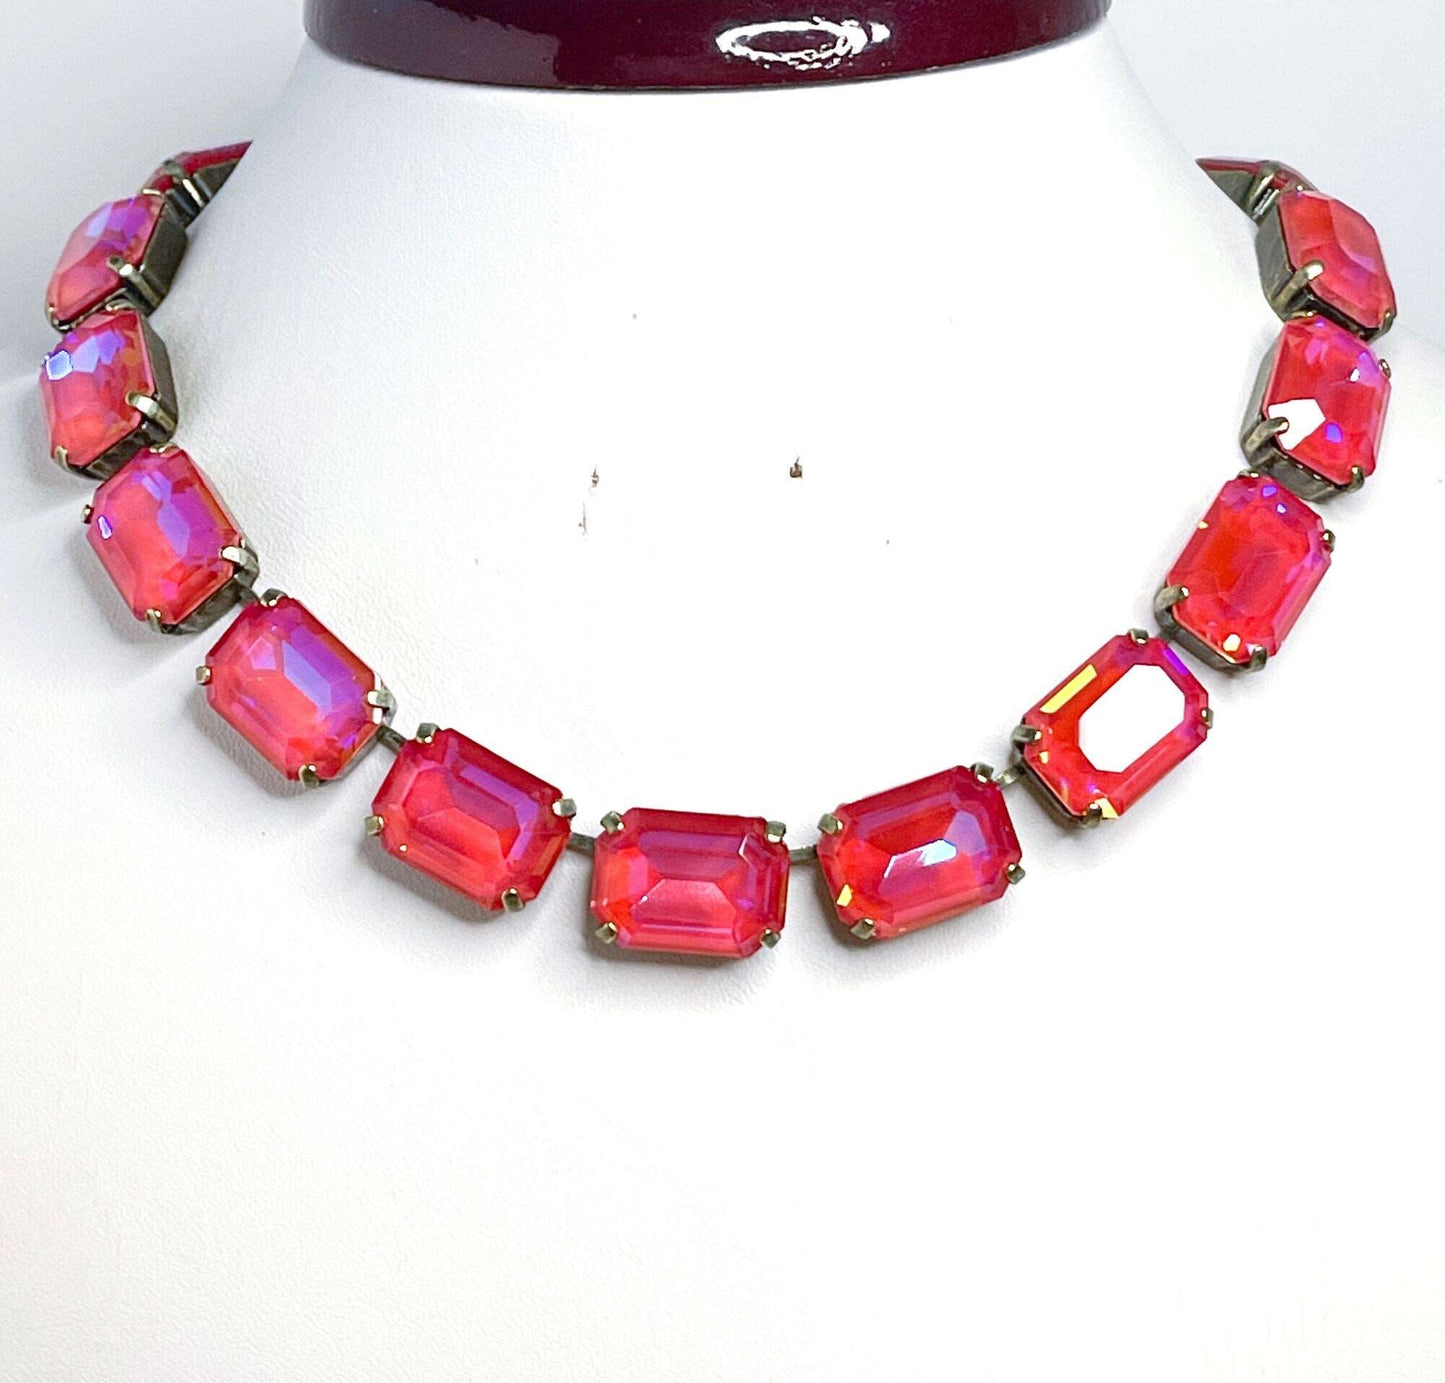 Royal Red Delite Crystal Necklace, Anna Wintour Style, Red Georgian Collet, Statement Rhinestone Choker, Necklaces for Women